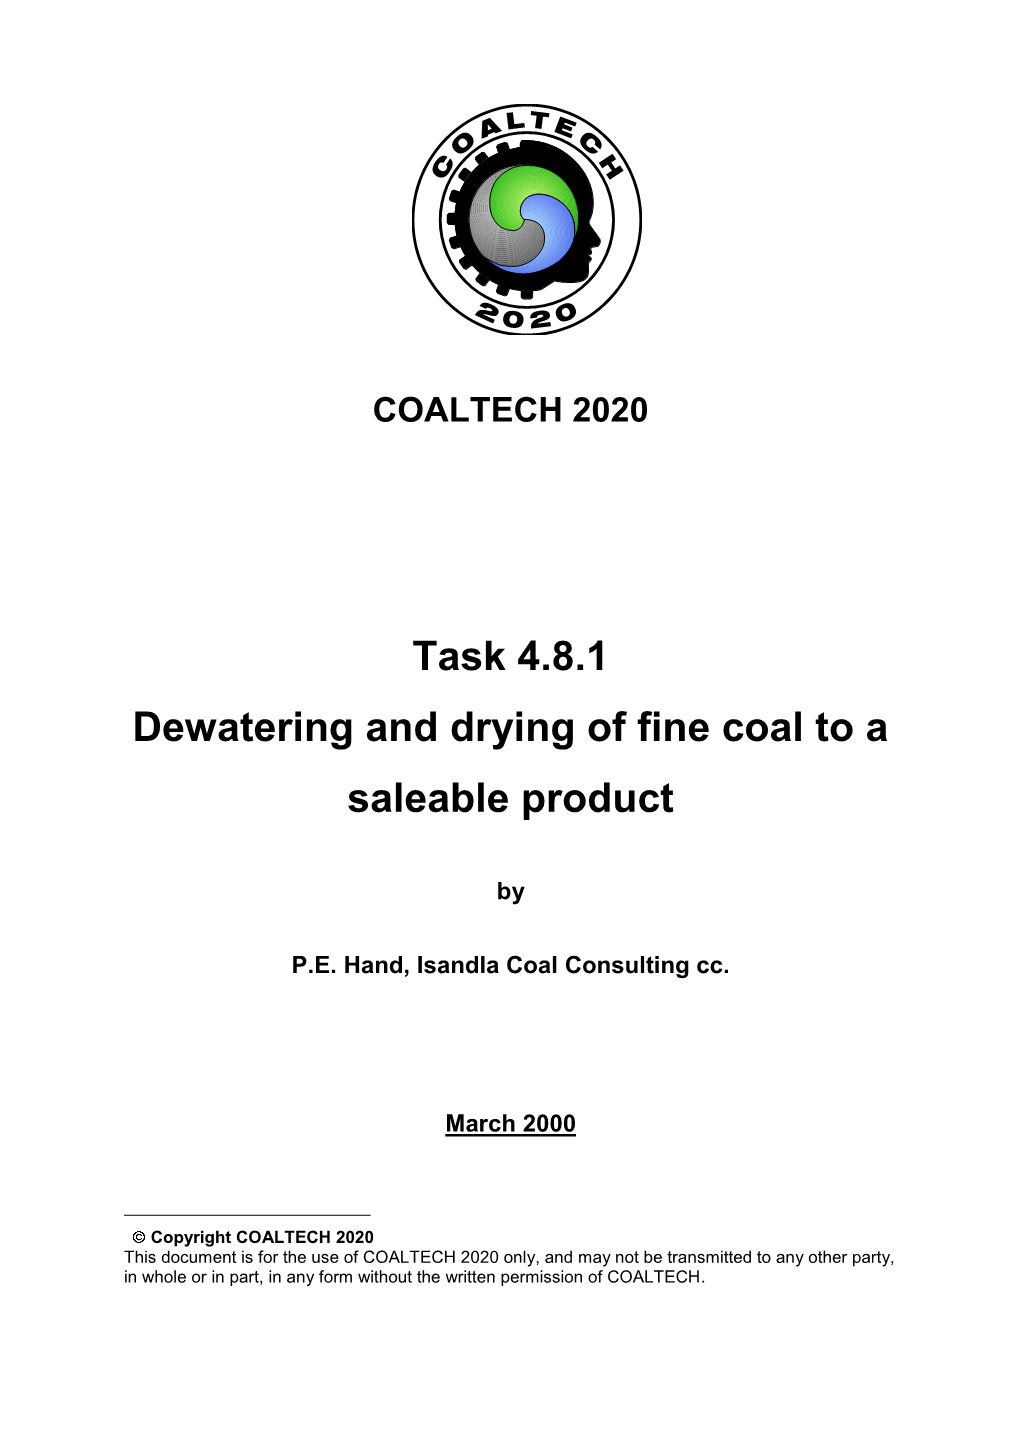 Dewatering and Drying of Fine Coal to a Saleable Product